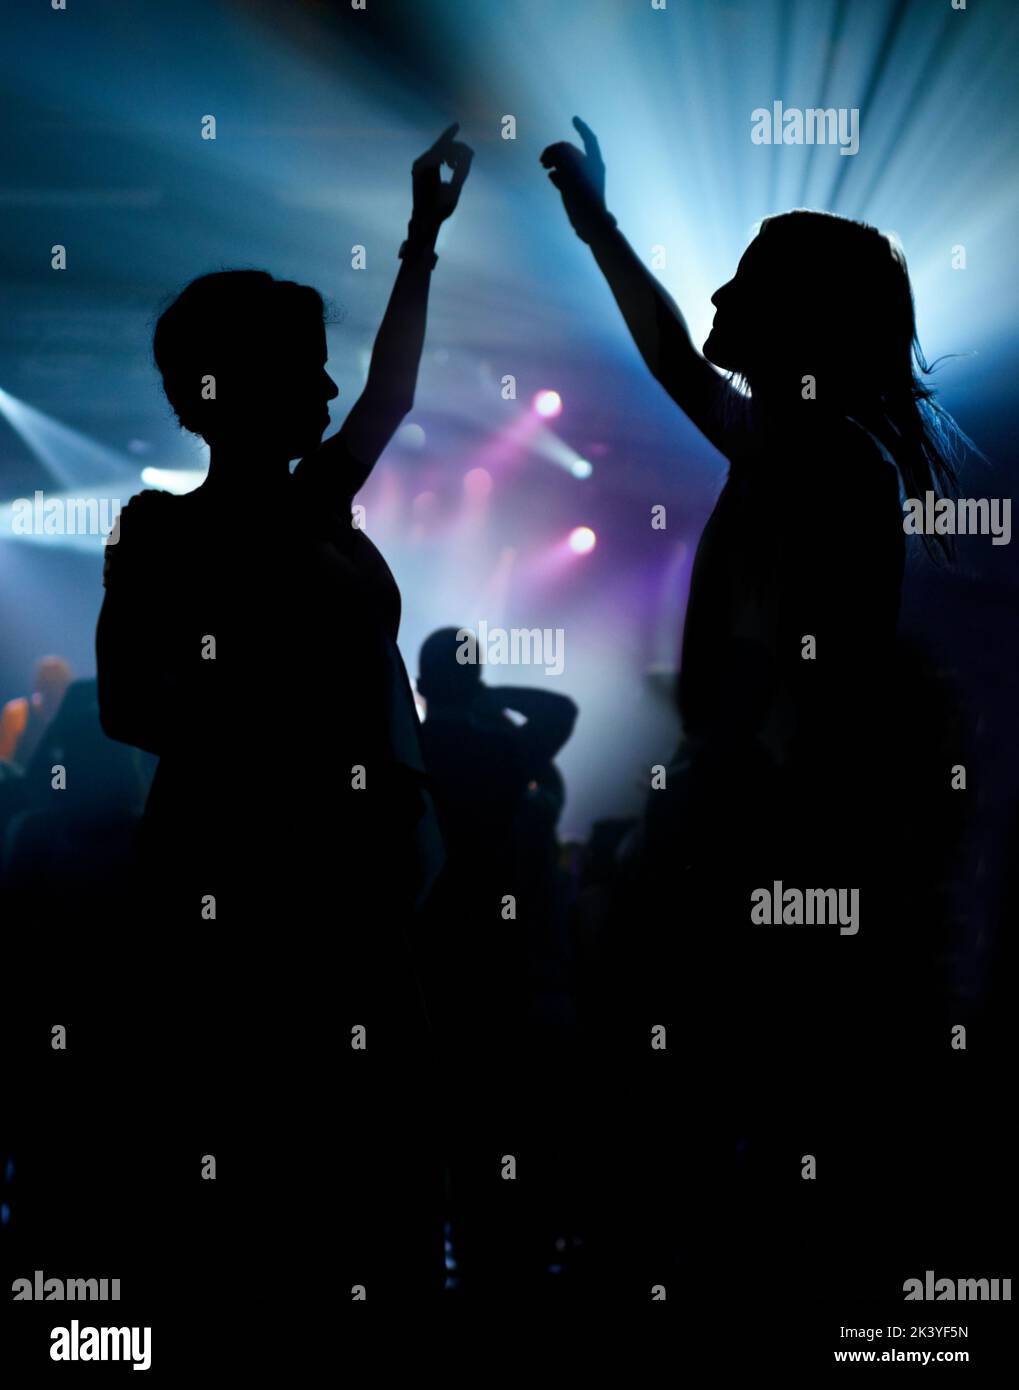 two women enjoying the music at a concert. This concert was created for the sole purpose of this photo shoot, featuring 300 models and 3 live bands Stock Photo